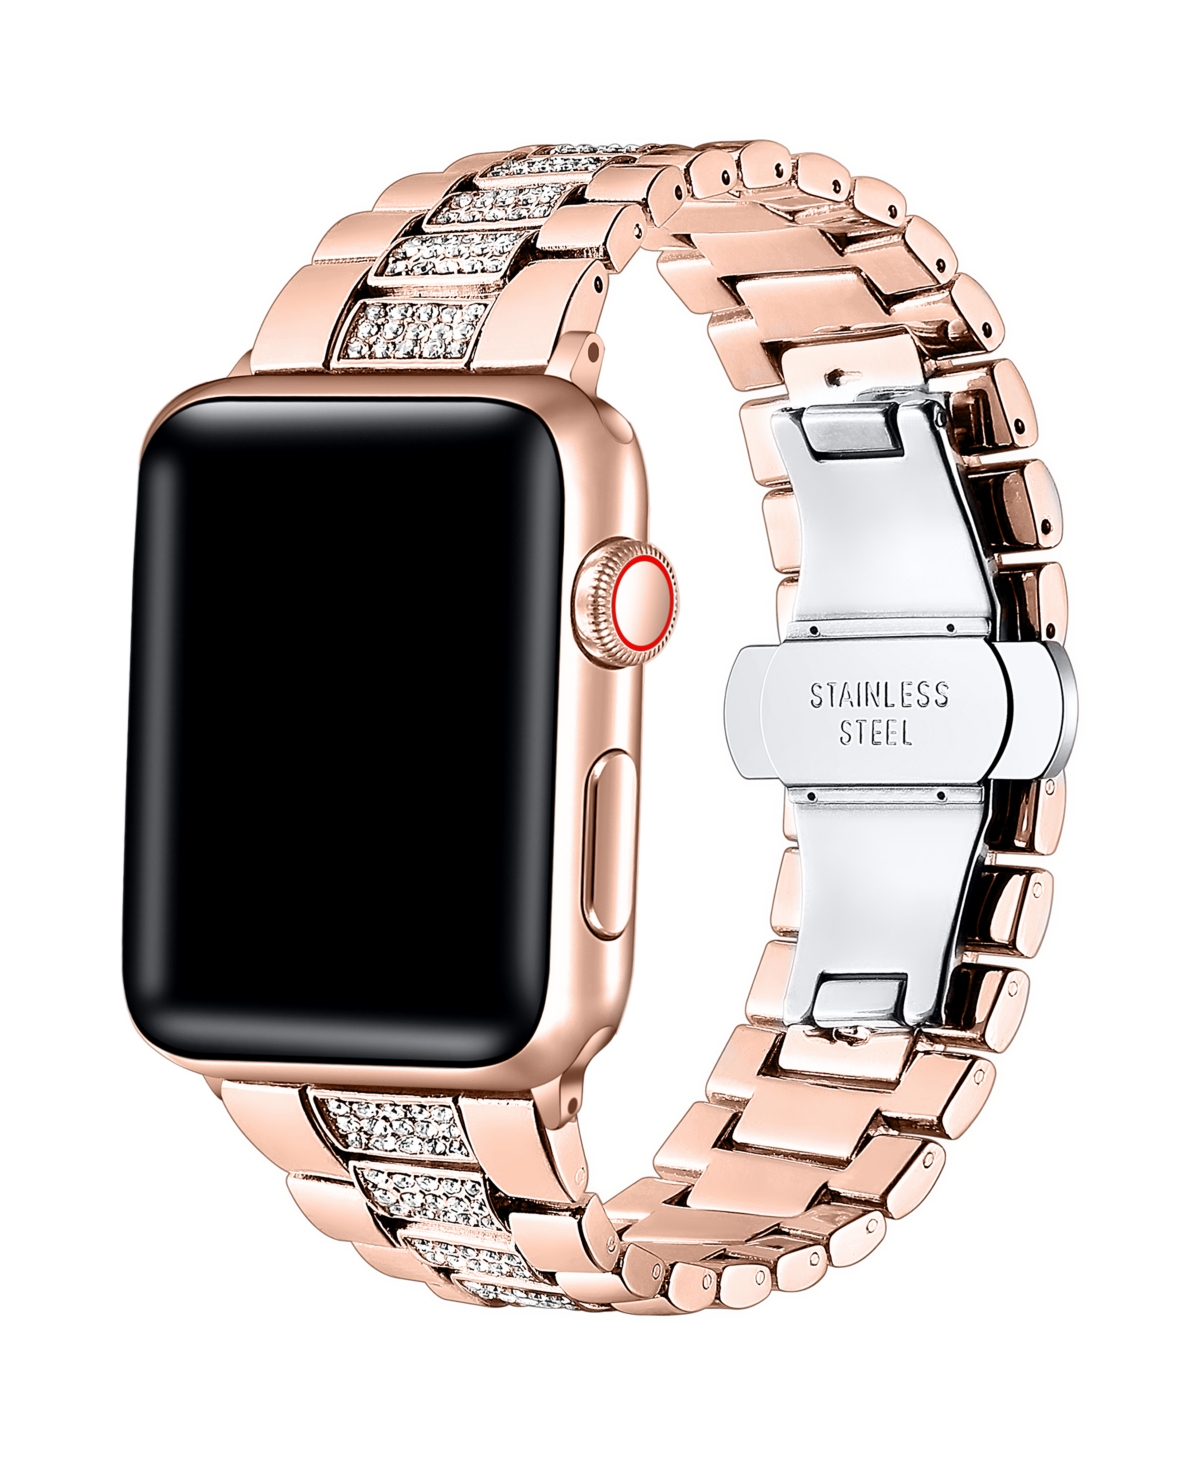 Women's Kristina Rose Gold Stainless Steel Band for Apple Watch Size-42mm,44mm,45mm,49mm - Rose Gold